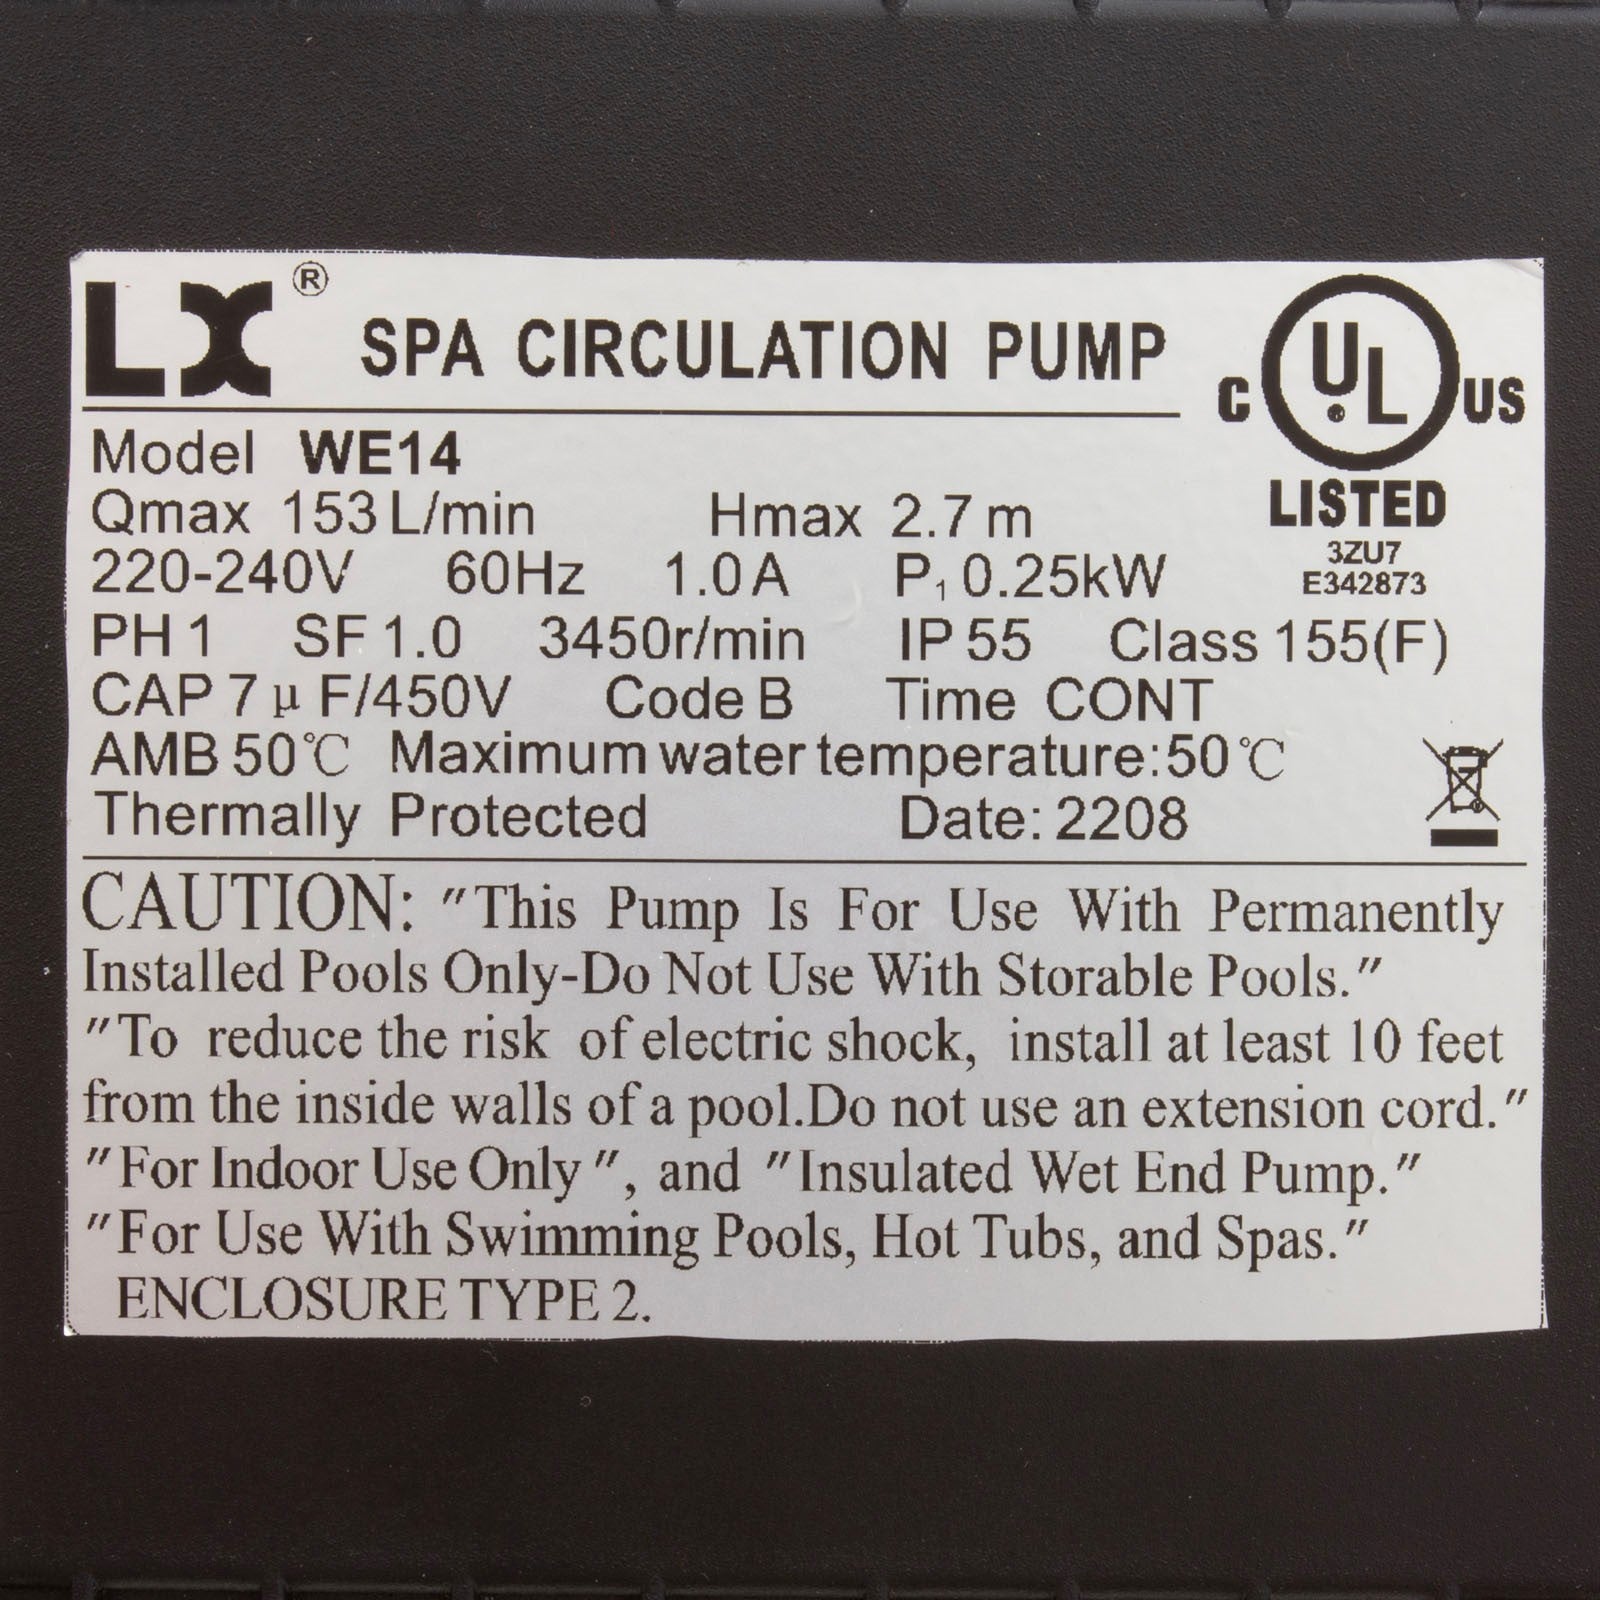 Label of the New Pump WE14